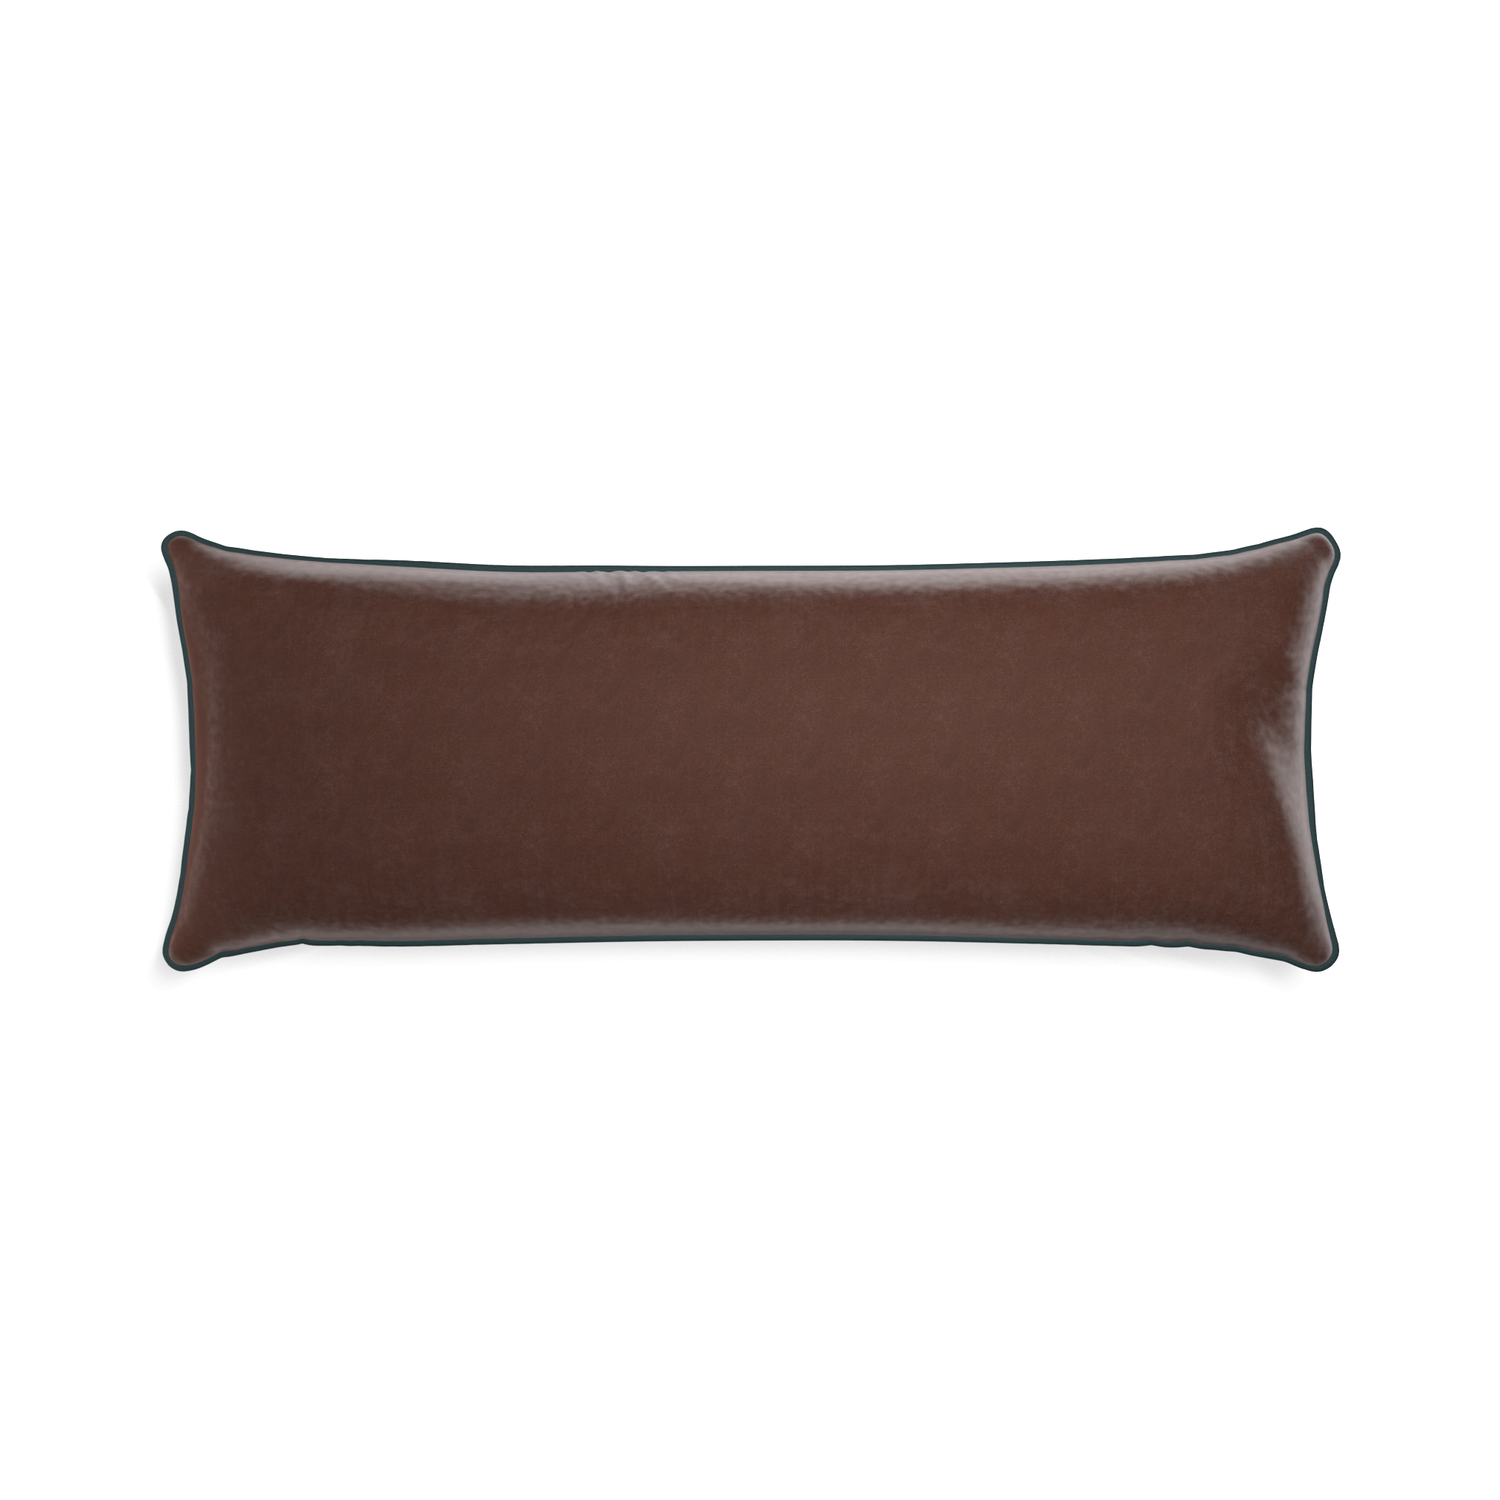 Xl-lumbar walnut velvet custom brownpillow with p piping on white background